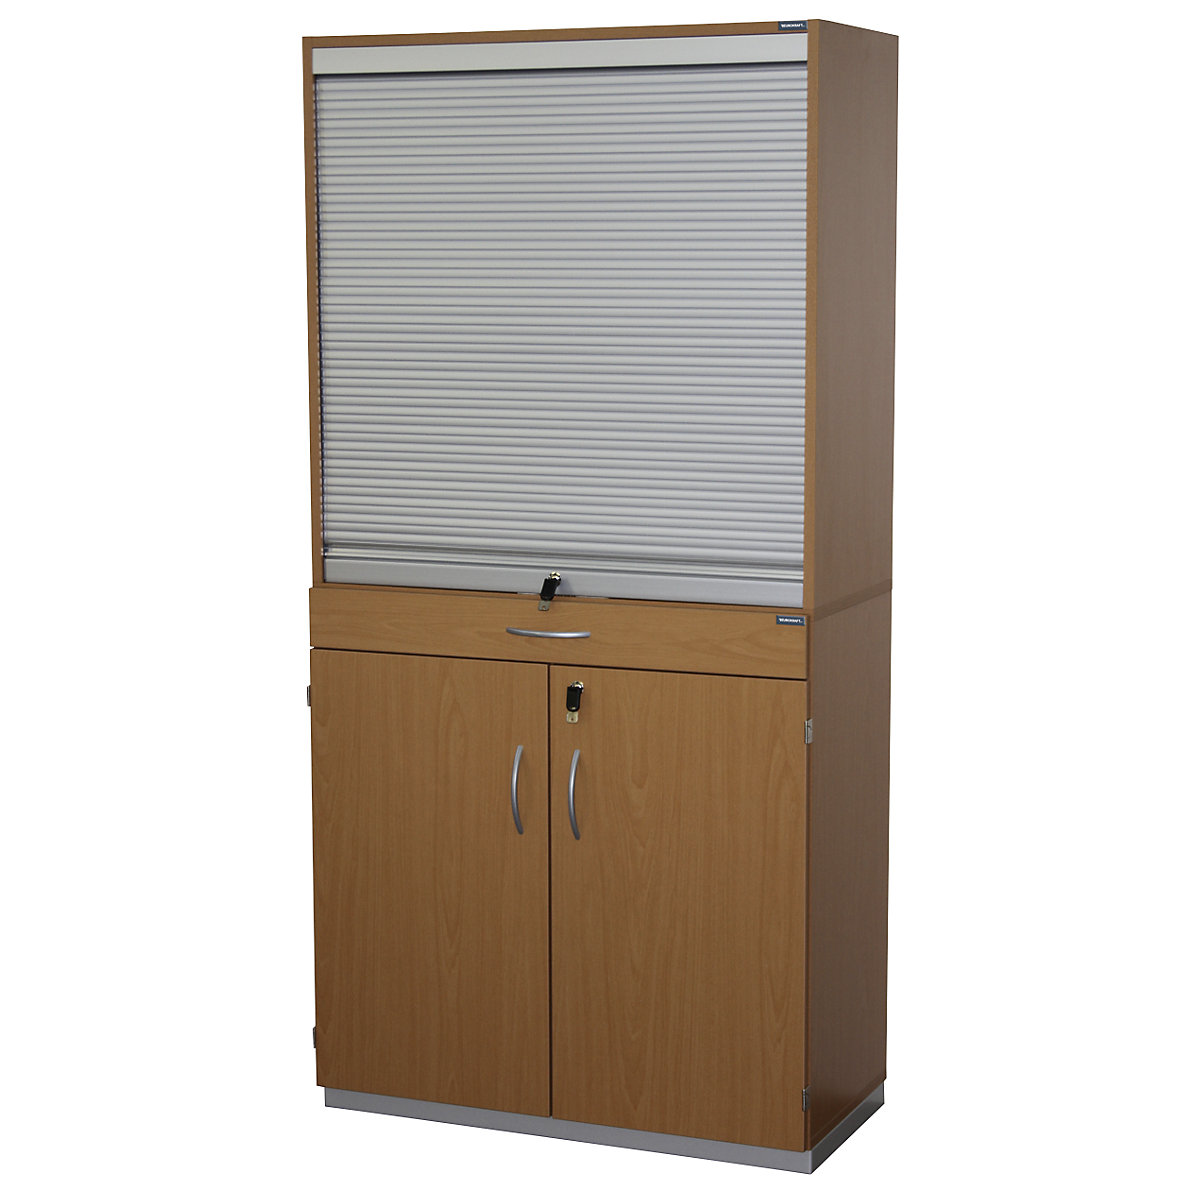 Sorting cupboard with roller shutter and add-on drawer unit – eurokraft pro